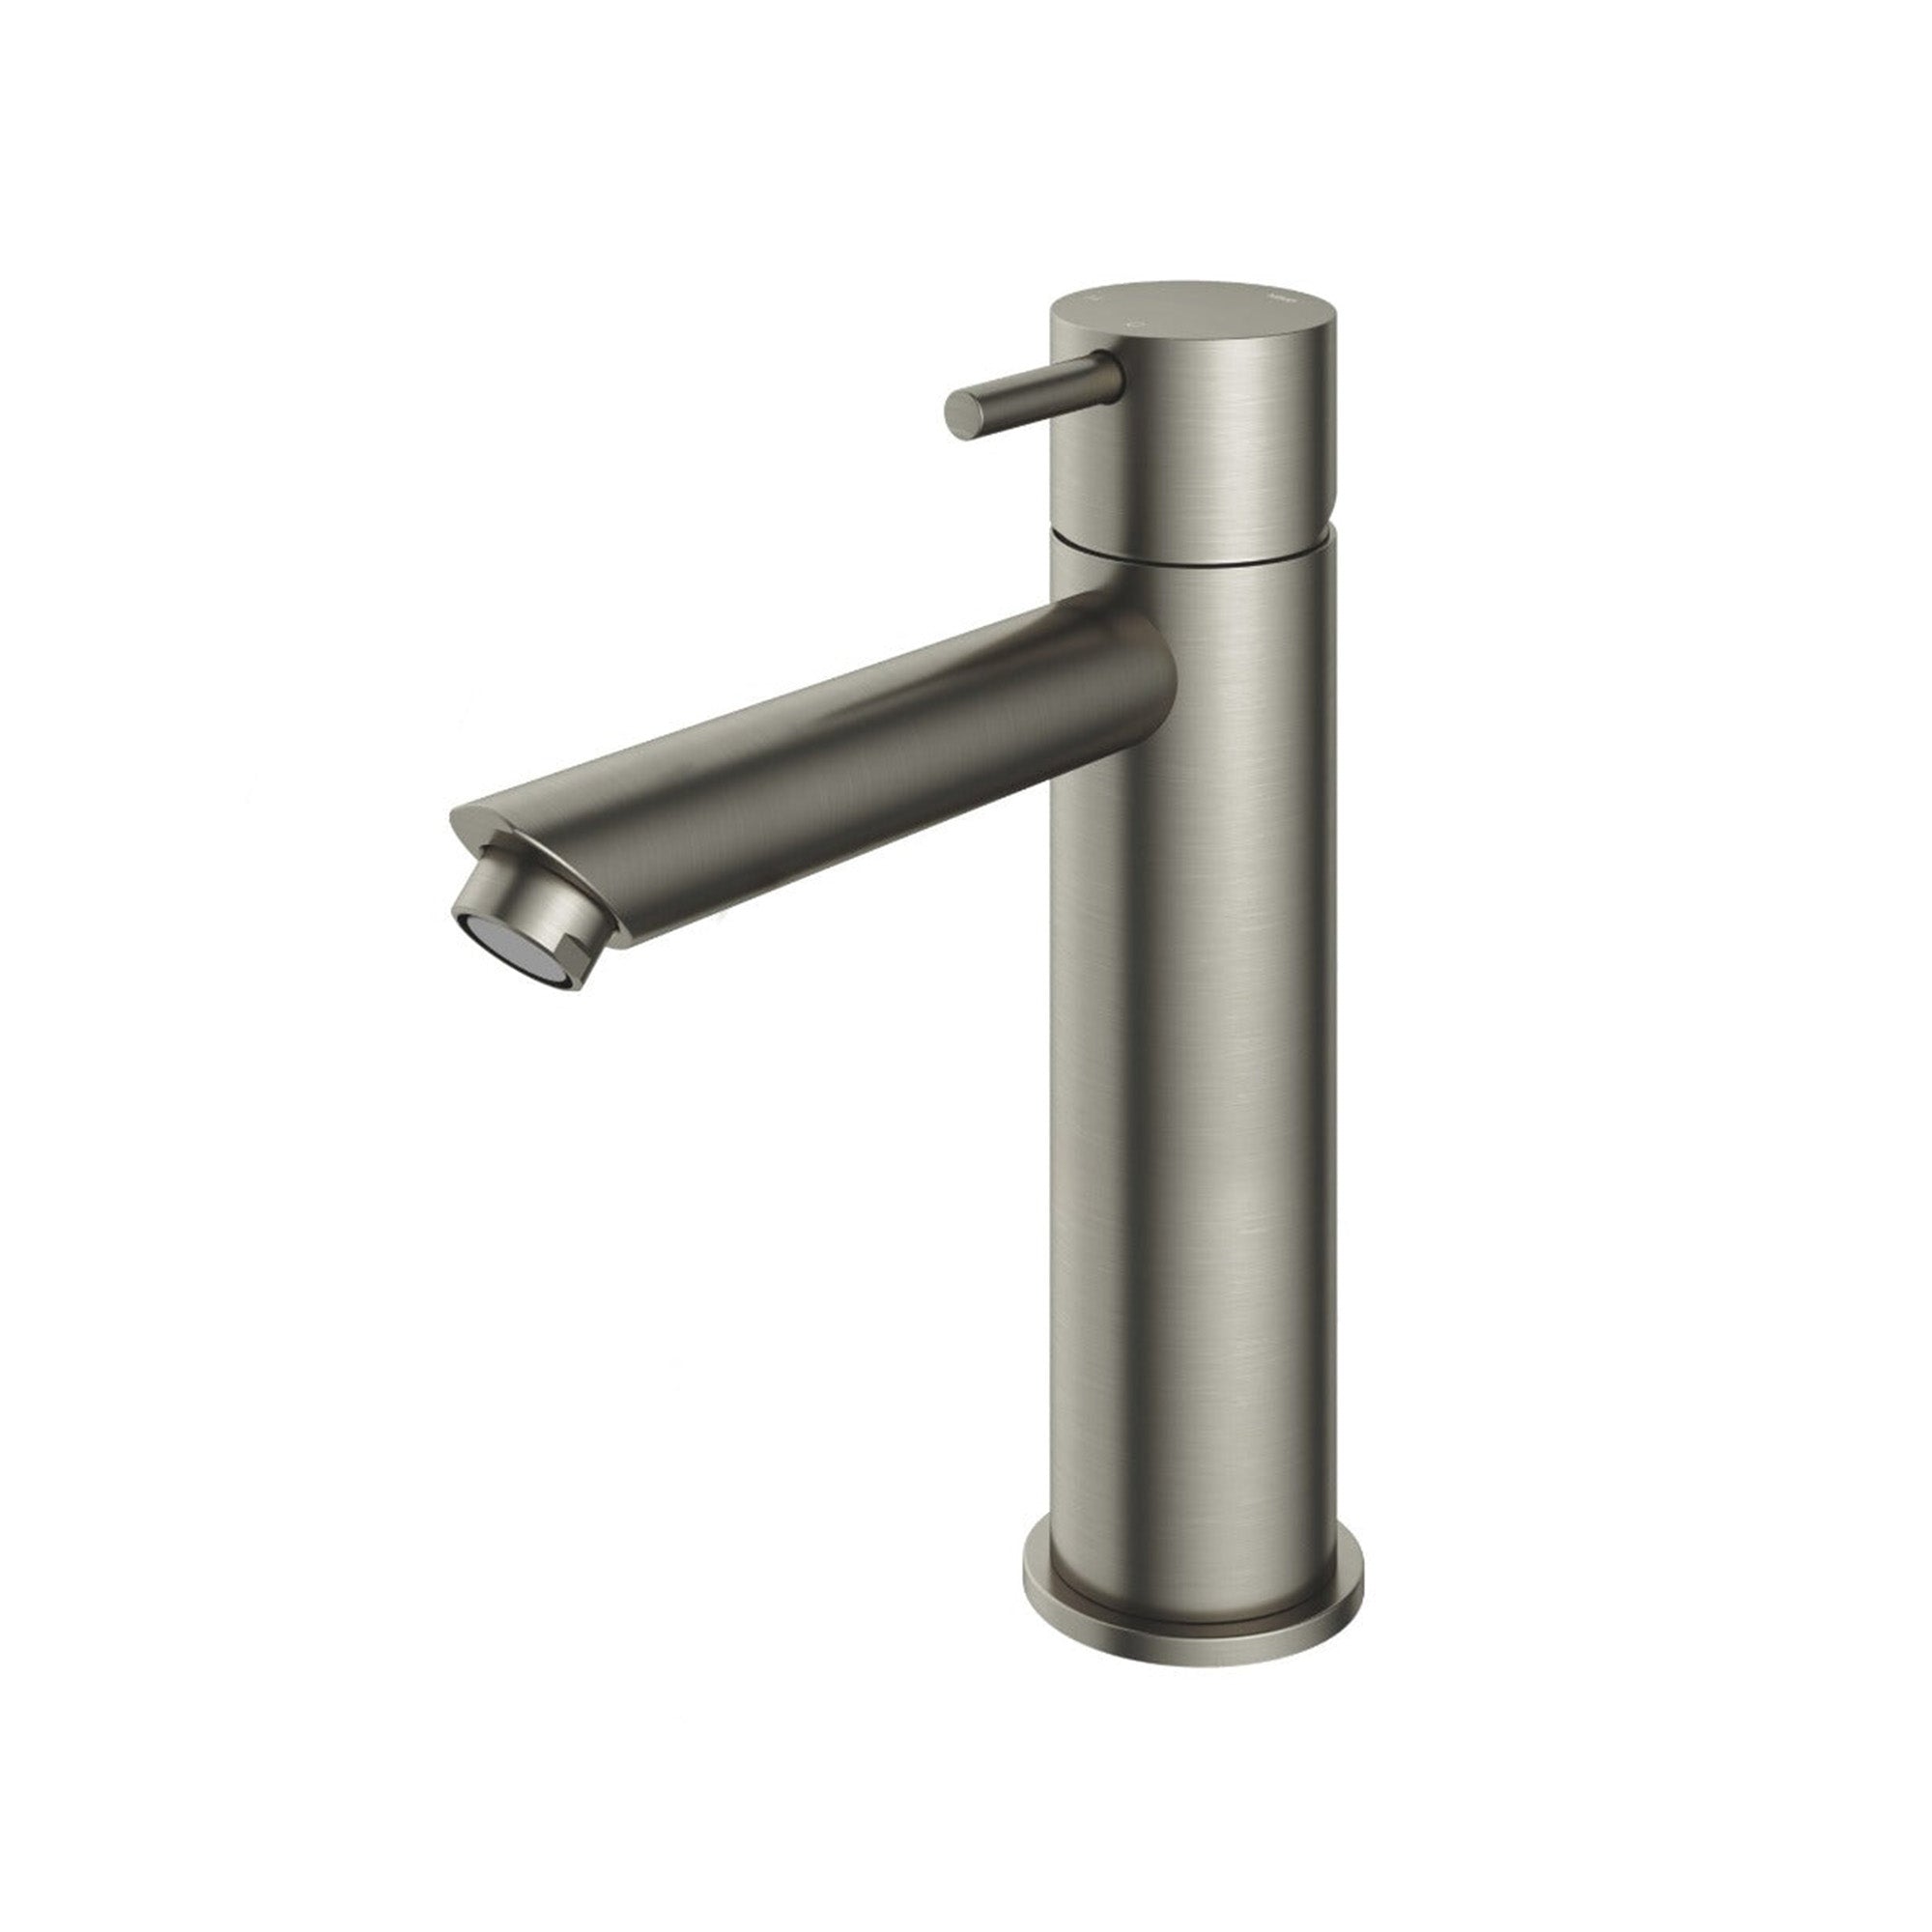 cobber 216mm basin mixer tap monobloc straight spout brushed nickel